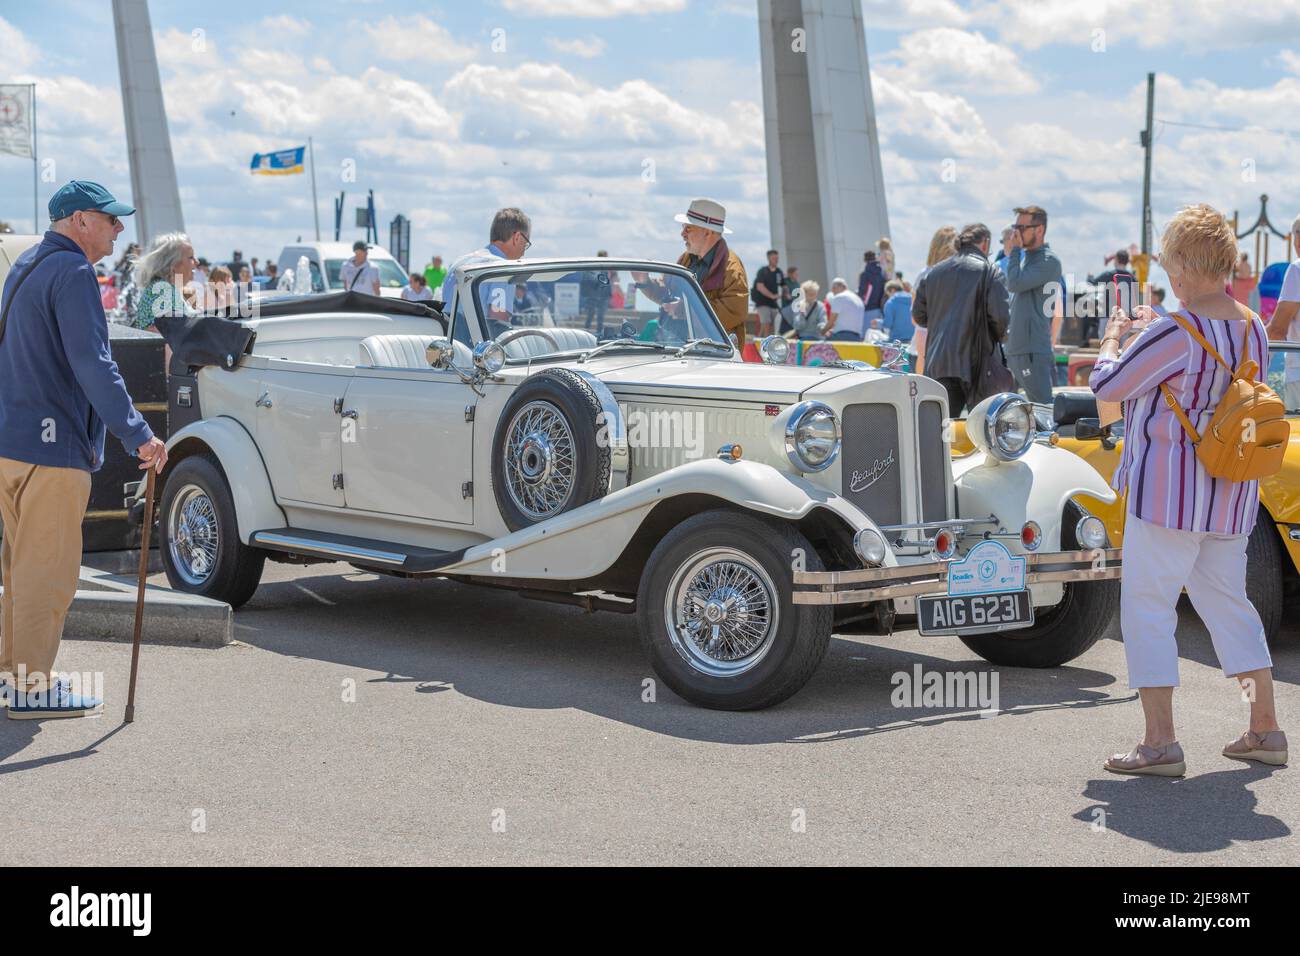 Southend on sea, UK. 26th June, 2022. Classic and vintage cars on display at the City Beach promenade in Southend. The cars and drivers have taken part in the 27th annual London to Southend classic vehicle run. Penelope Barritt/Alamy Live News Stock Photo